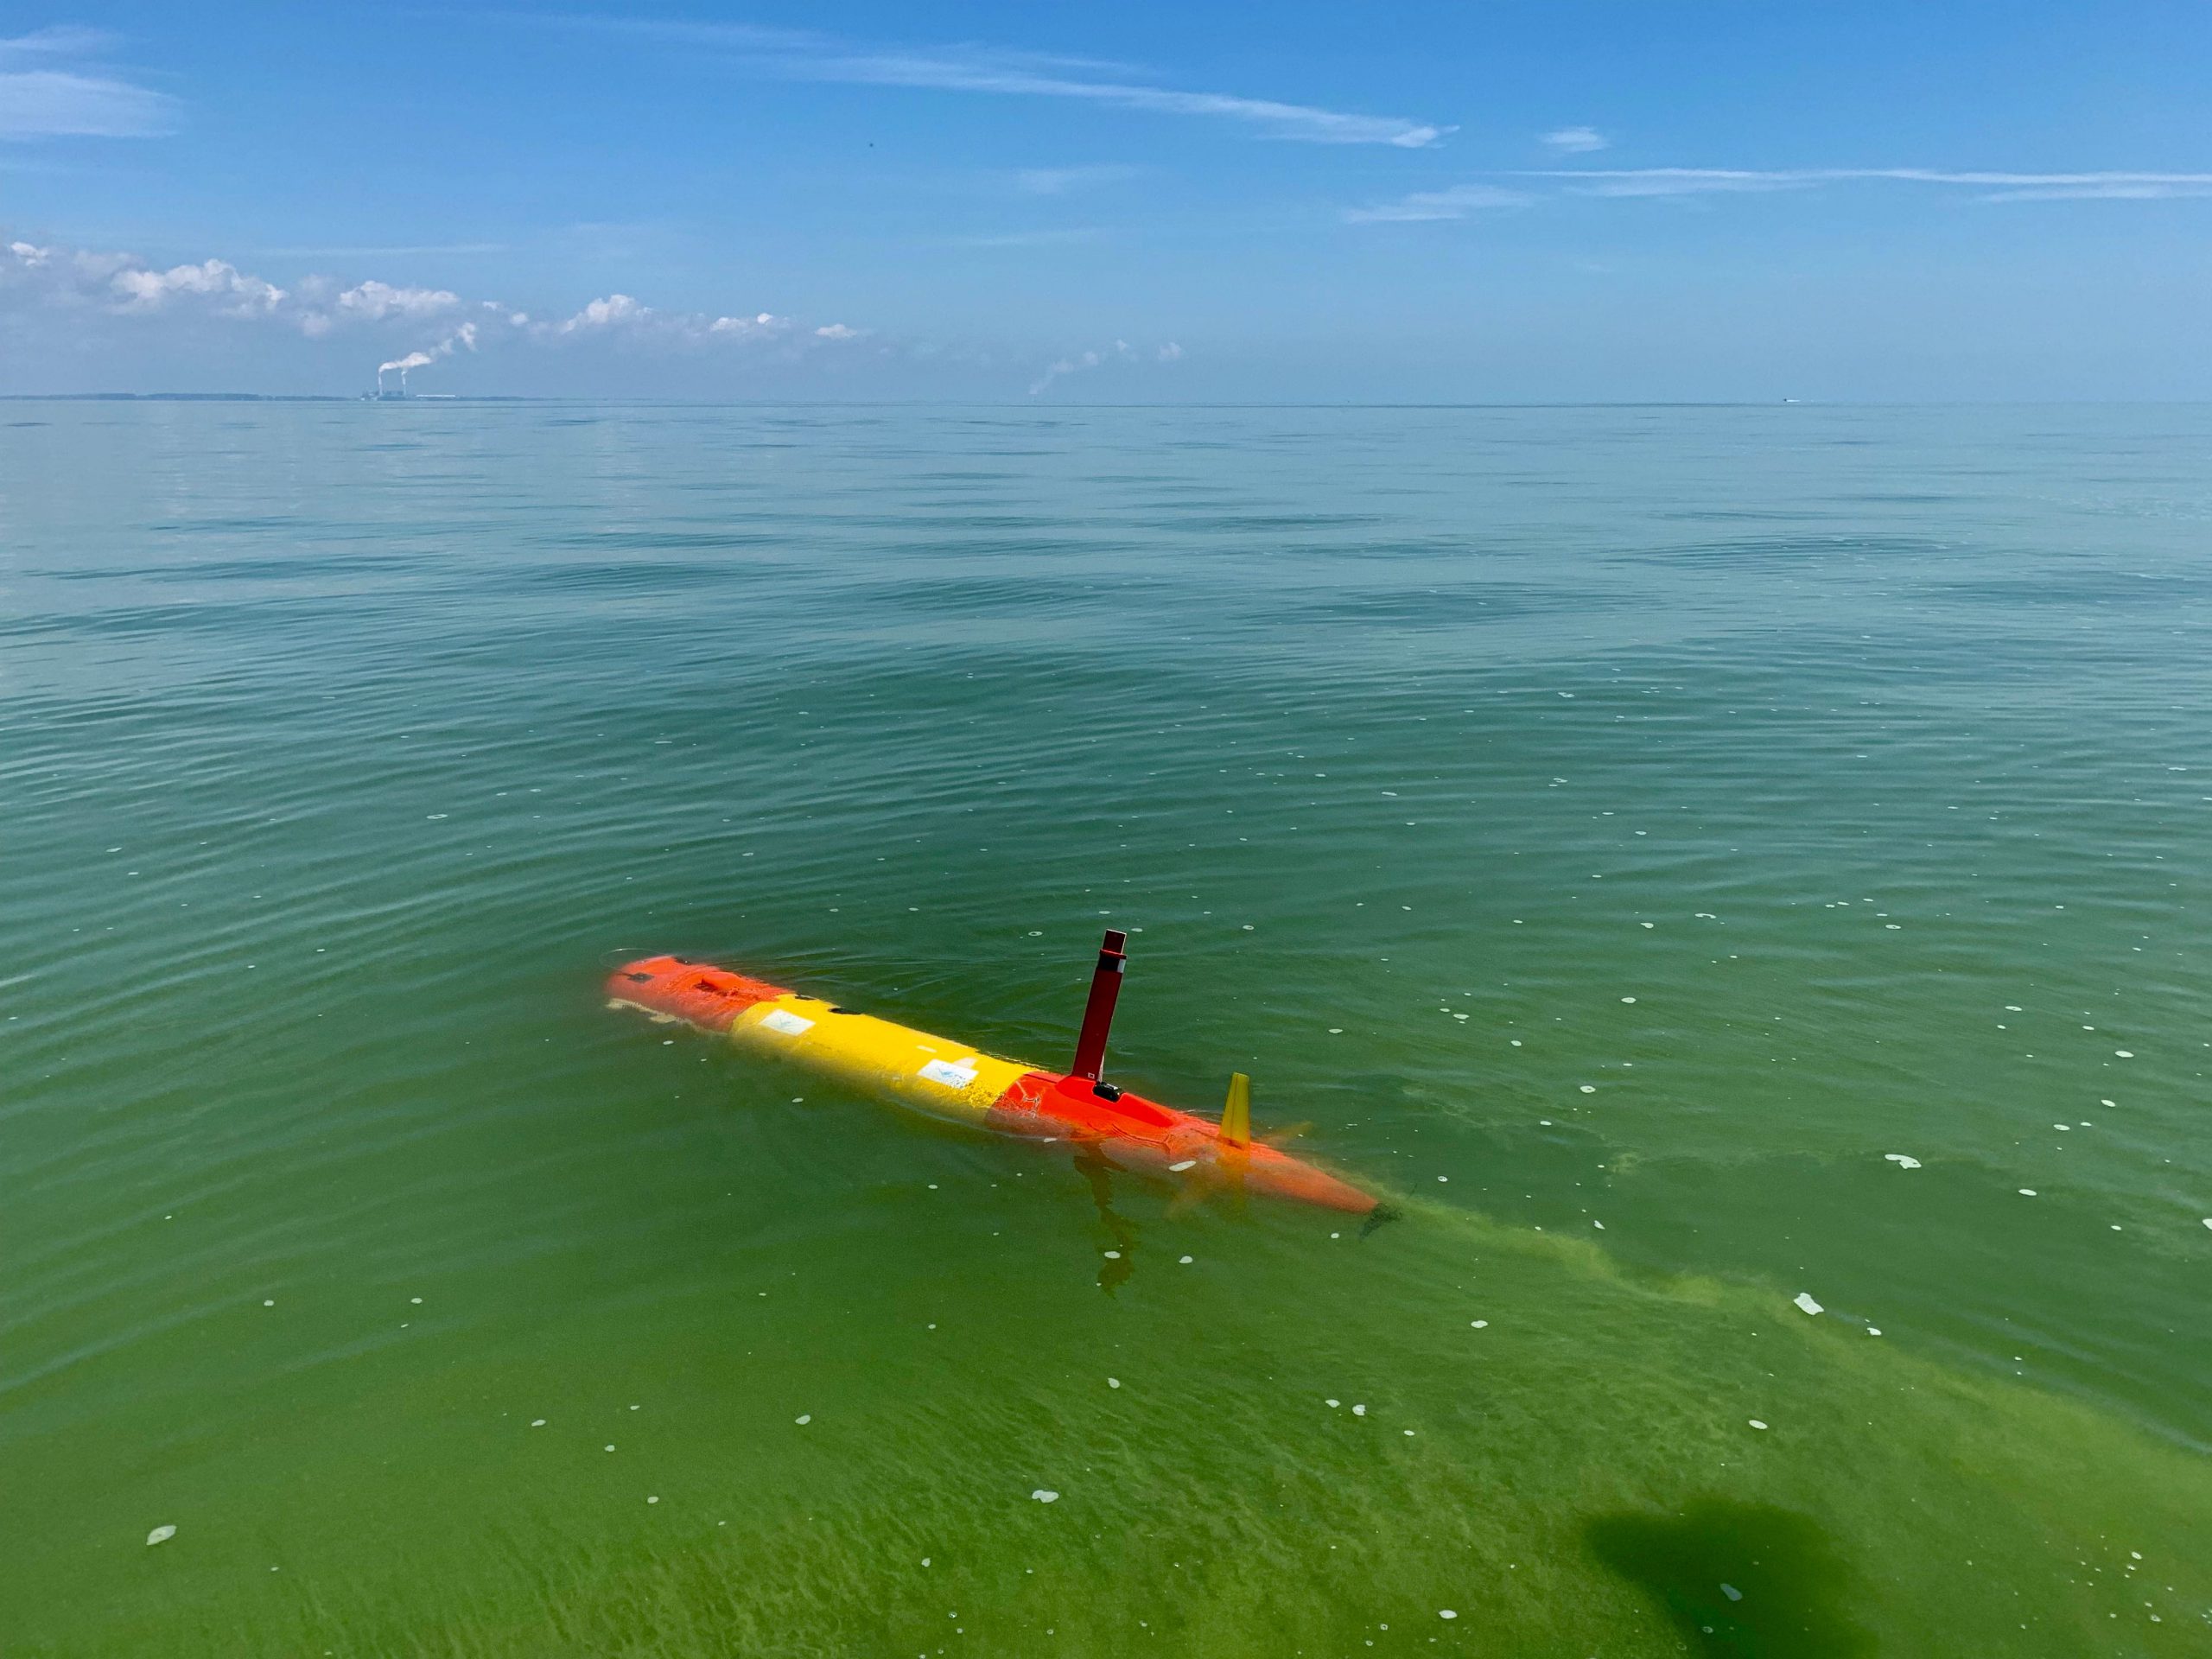 red and yellow torpedo-like object in green water.